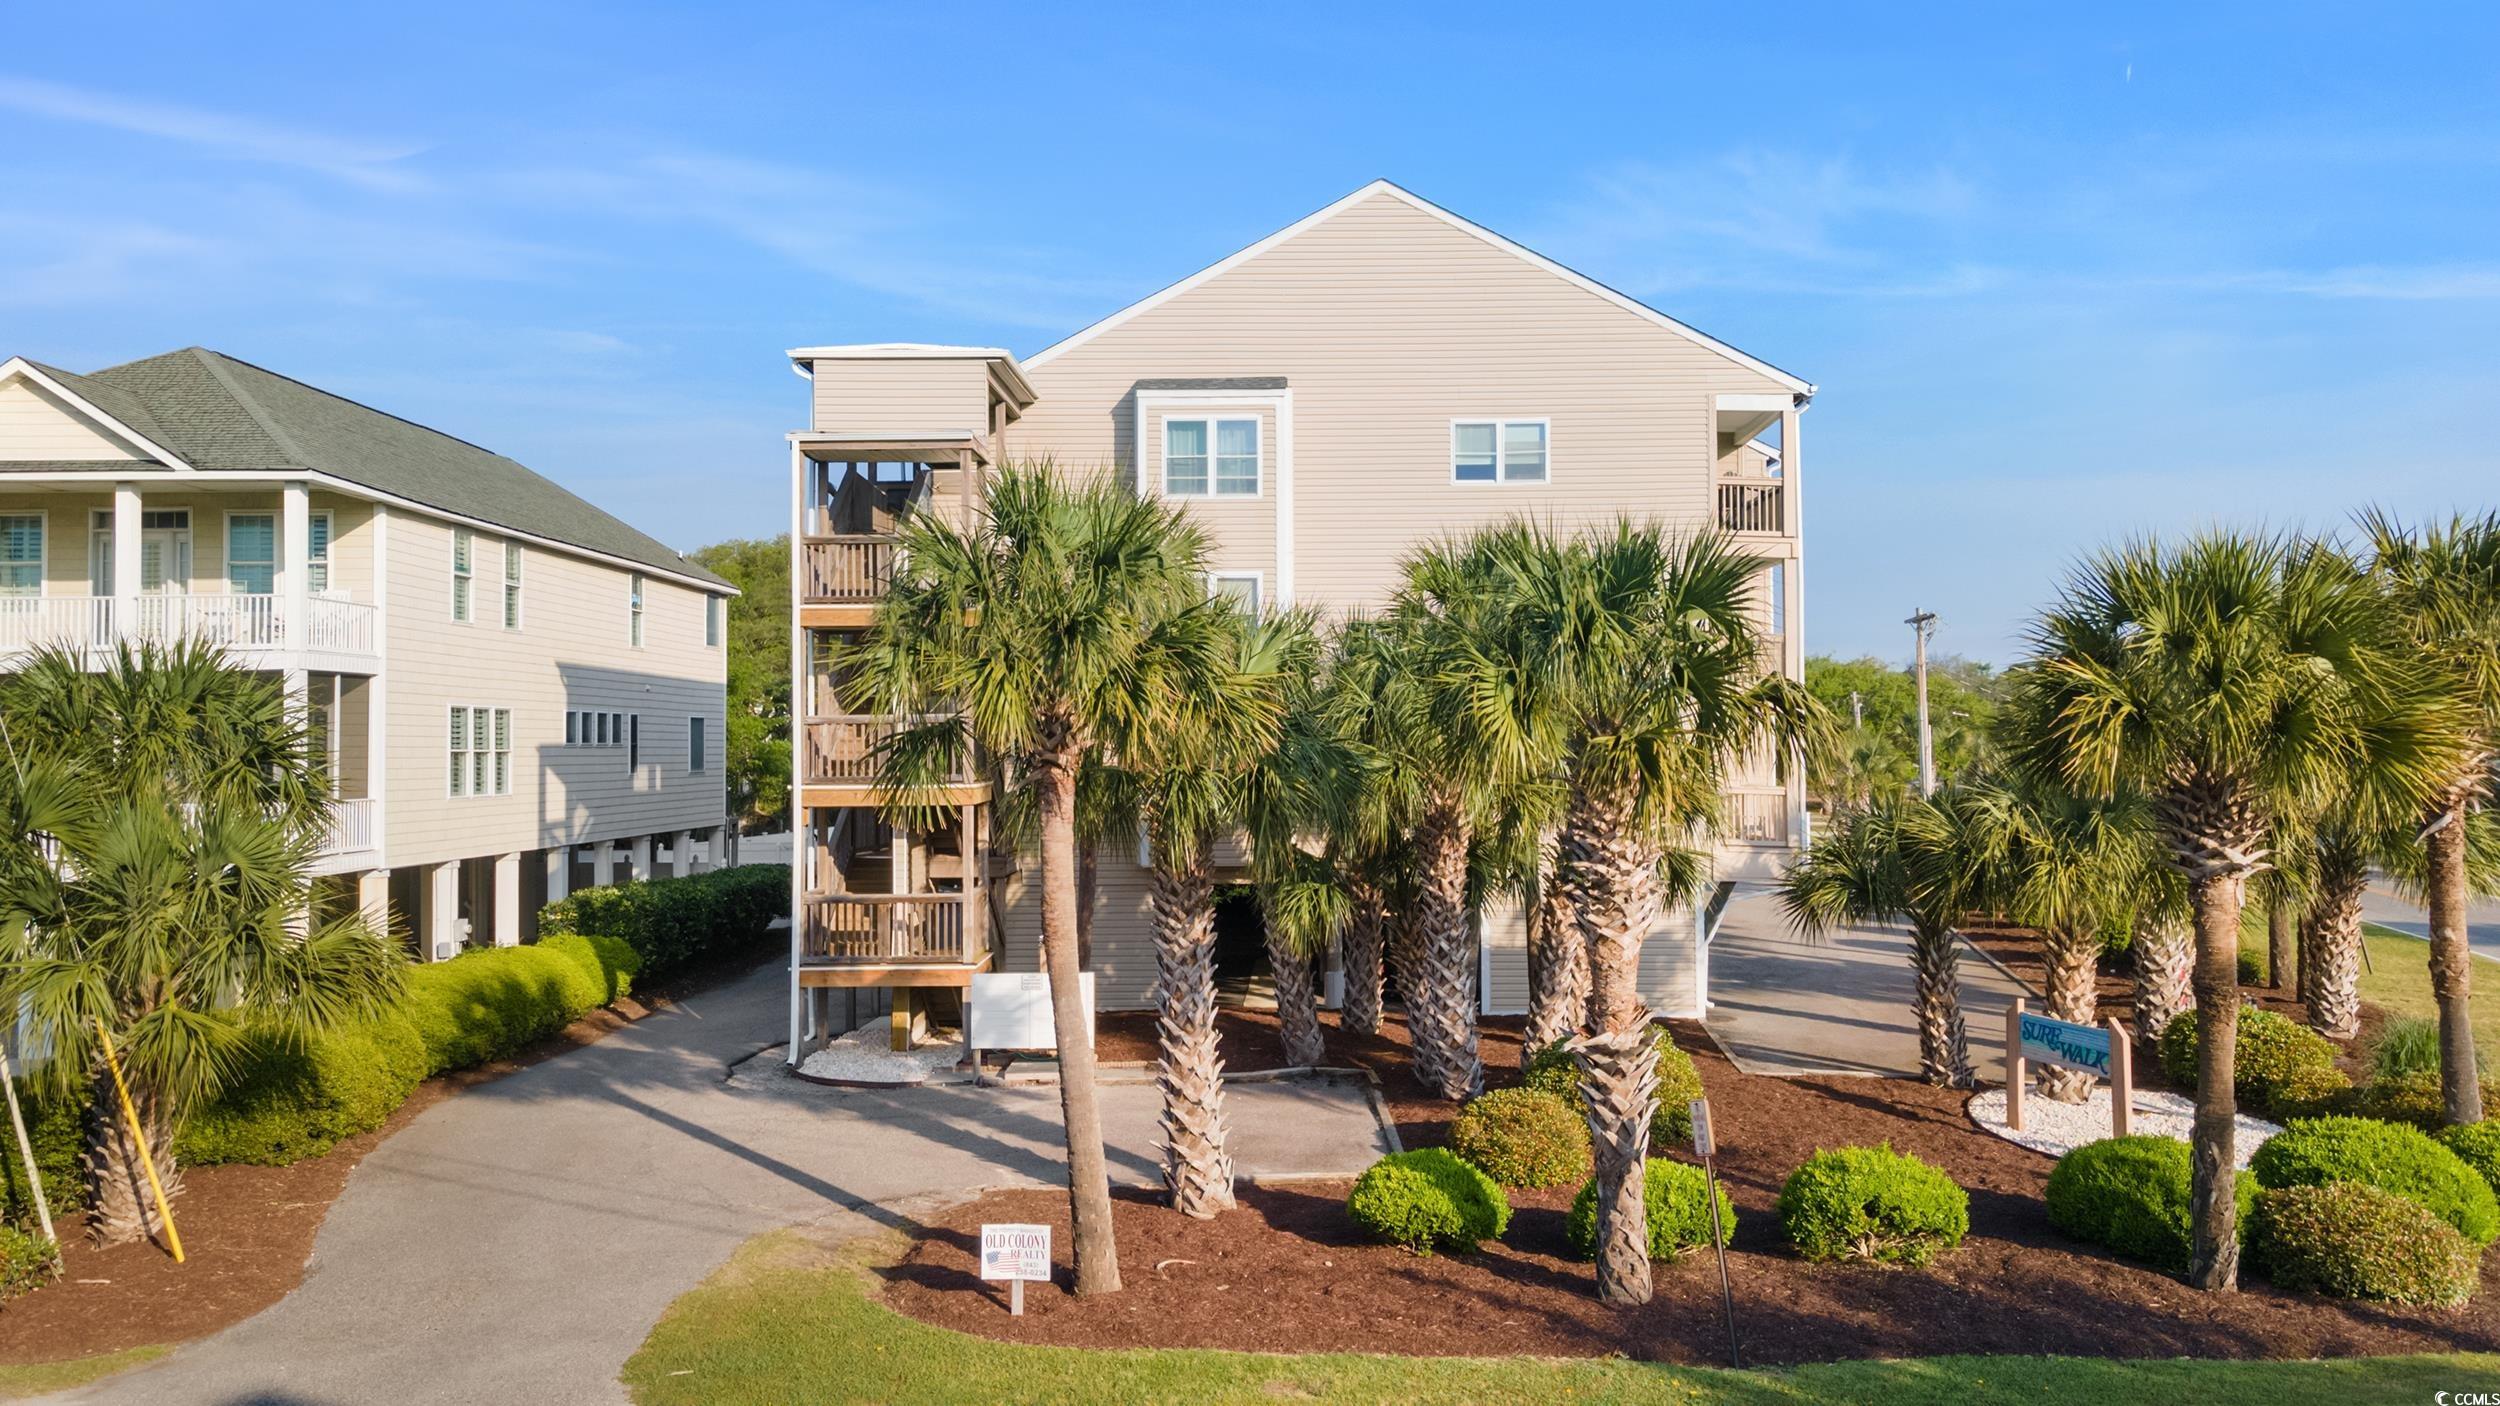 you will love this turnkey 2 bedroom, 2 bathroom condo just one block from the ocean! step inside to find a modern interior with many updates, including a new kitchen and new bathroom vanities, both updated in 2023. additional updates include: newer appliances (2020-2023), new windows (2024), hvac (2020), roof (2022), hot water heater (2018).  this corner, lockout-style unit offers ocean views, a spacious living room, dining room, and kitchen area and provides the ability to generate rental income. the condo has a lockout feature, allowing for flexibility in renting out one side while still enjoying privacy in the other. access the second floor via stairs or elevator. laundry room is located on the third floor. steps from the beach and convenient to all surfside beach has to offer!